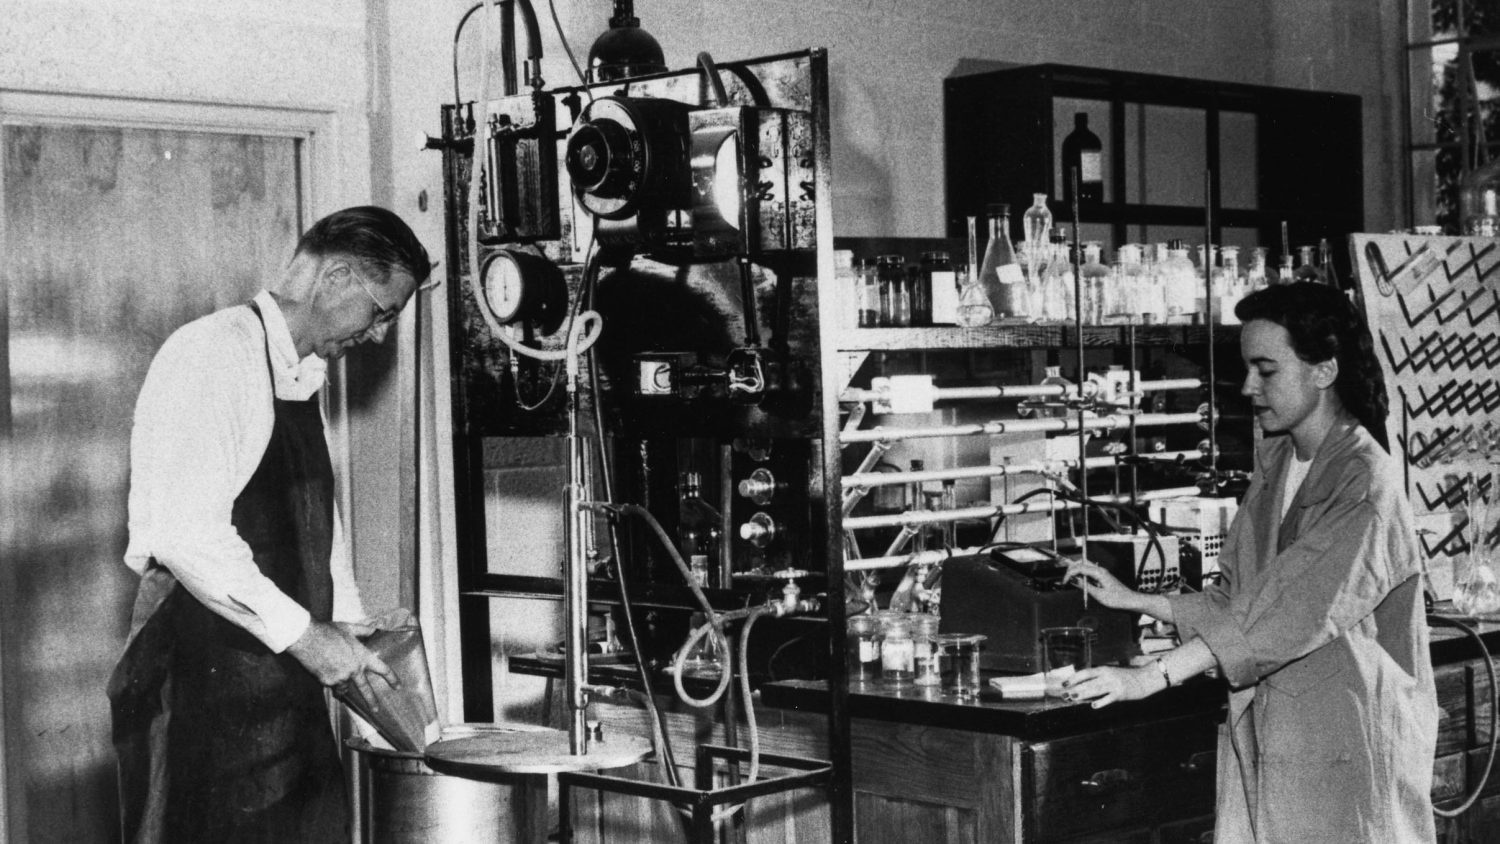 Professor Frances M. "Billie" Richardson (right) and male associate working in lab.